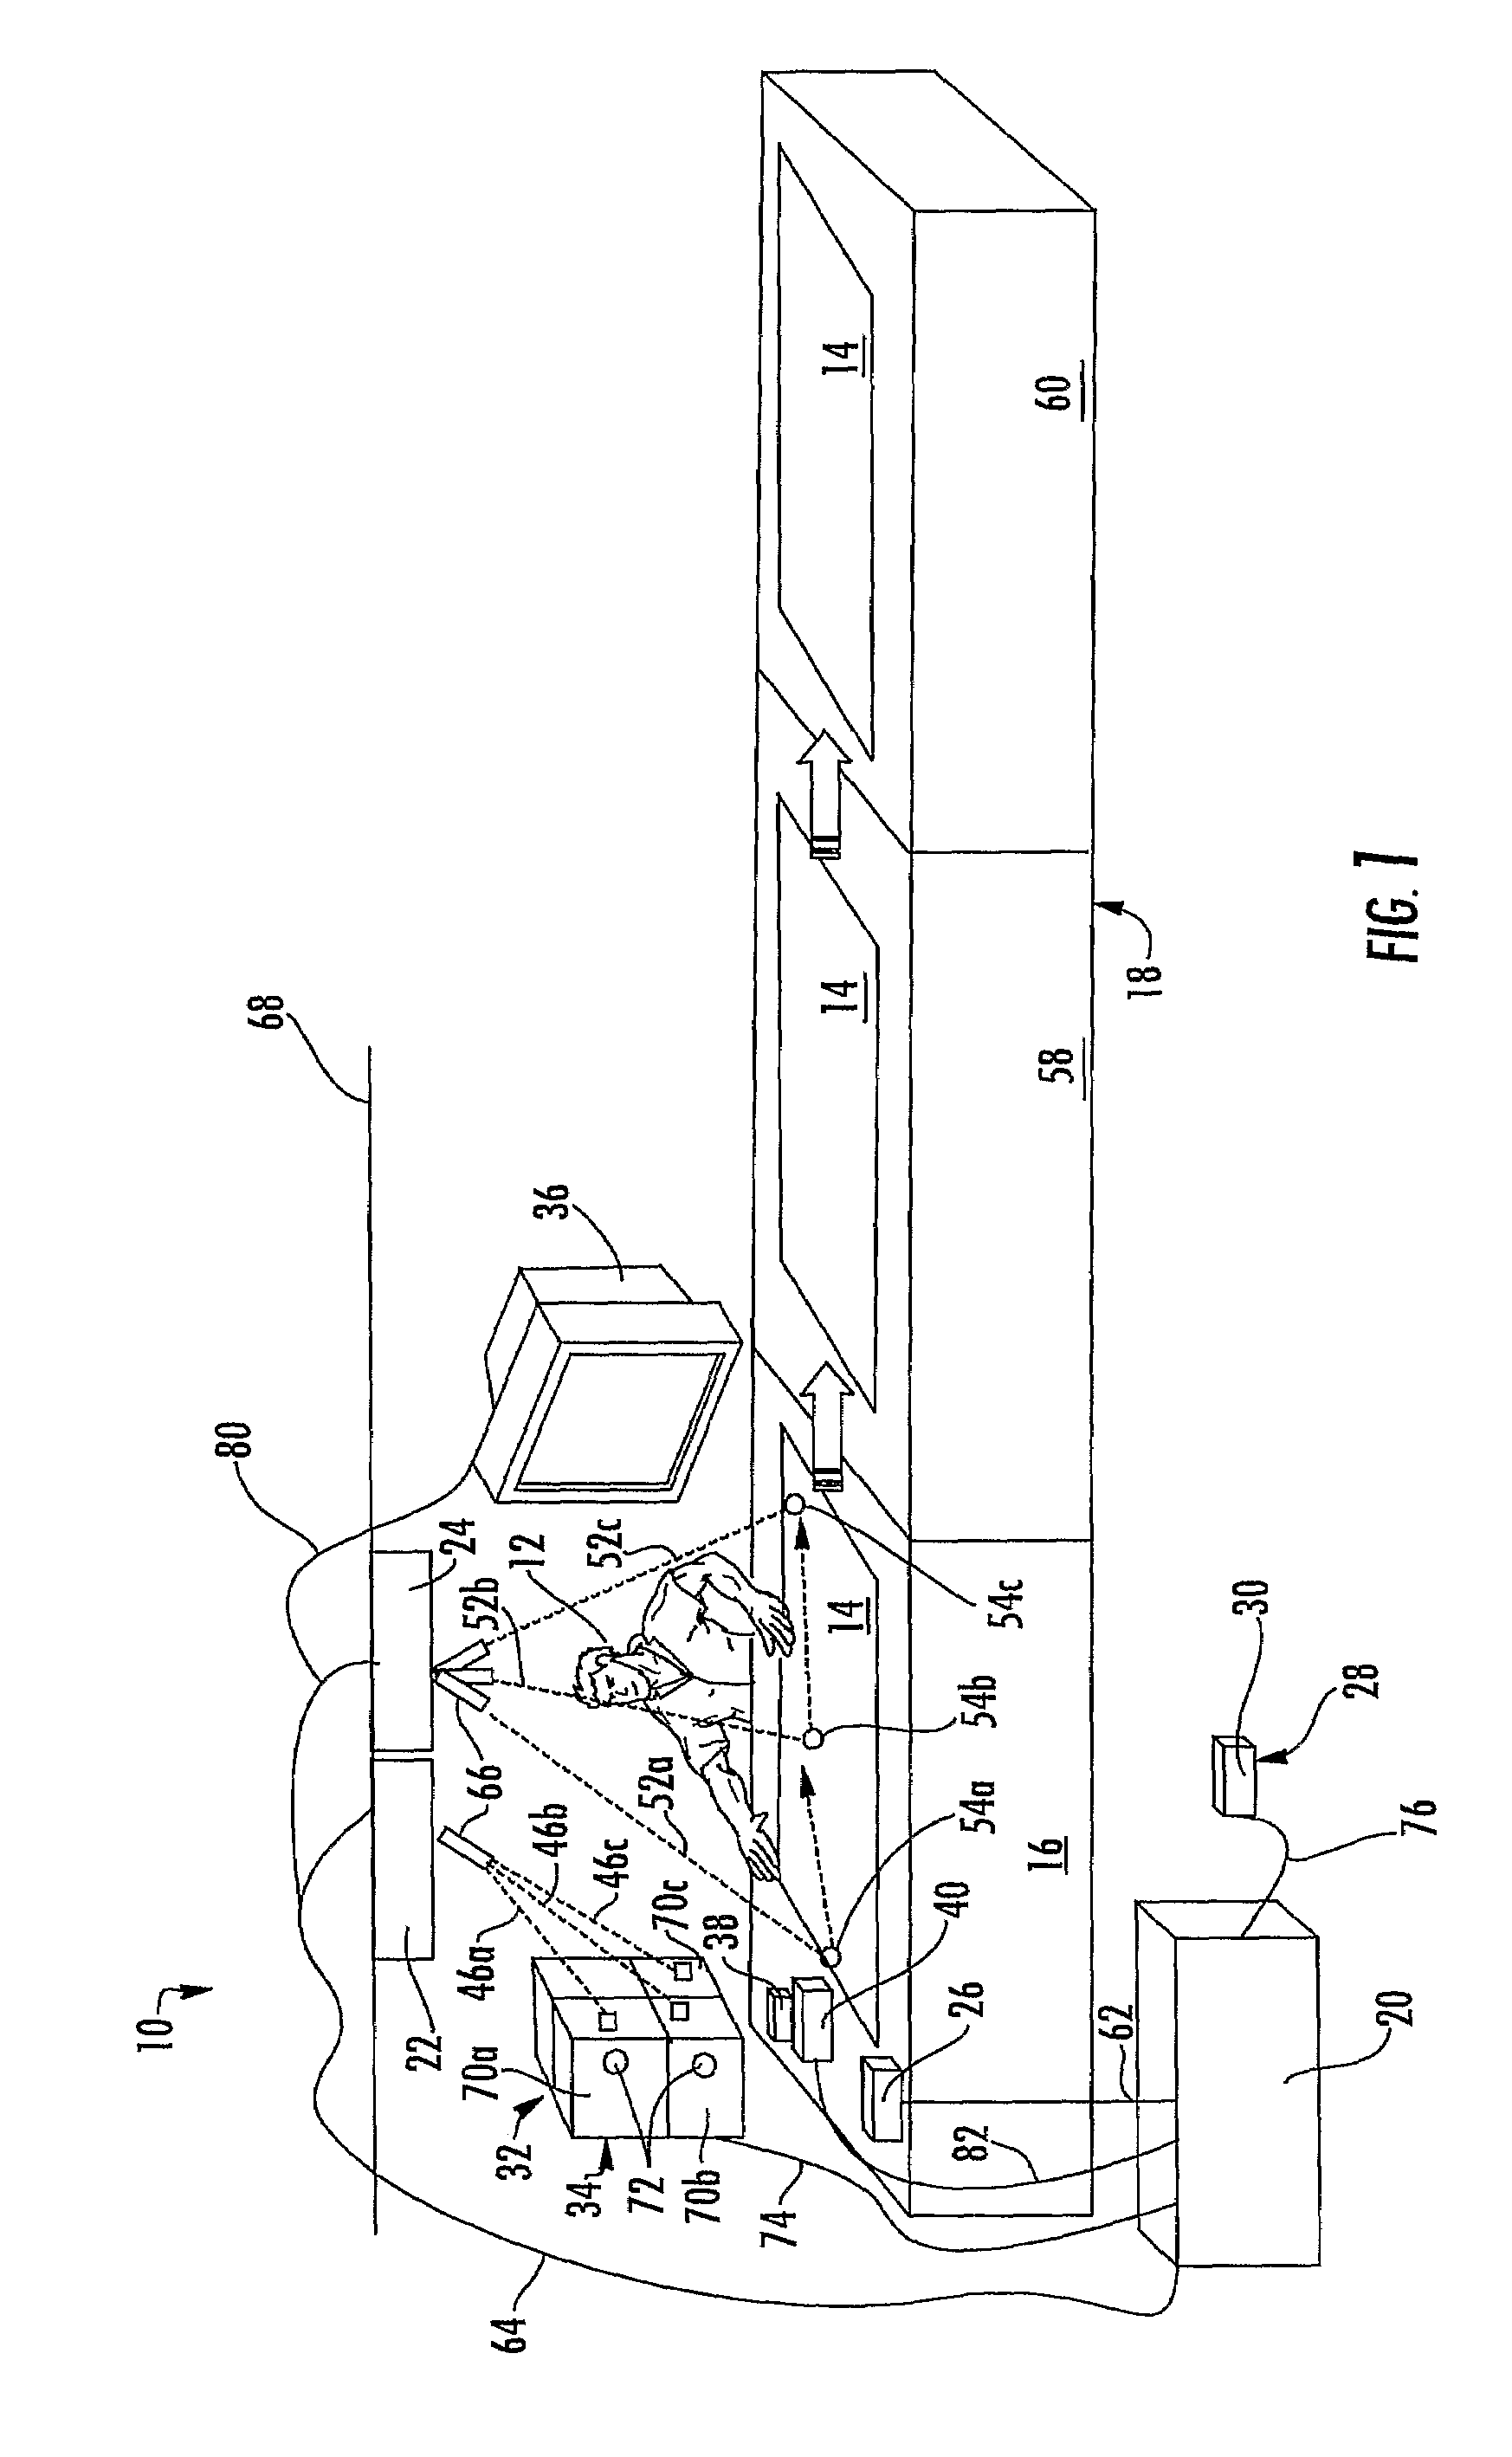 Light guided assembly system